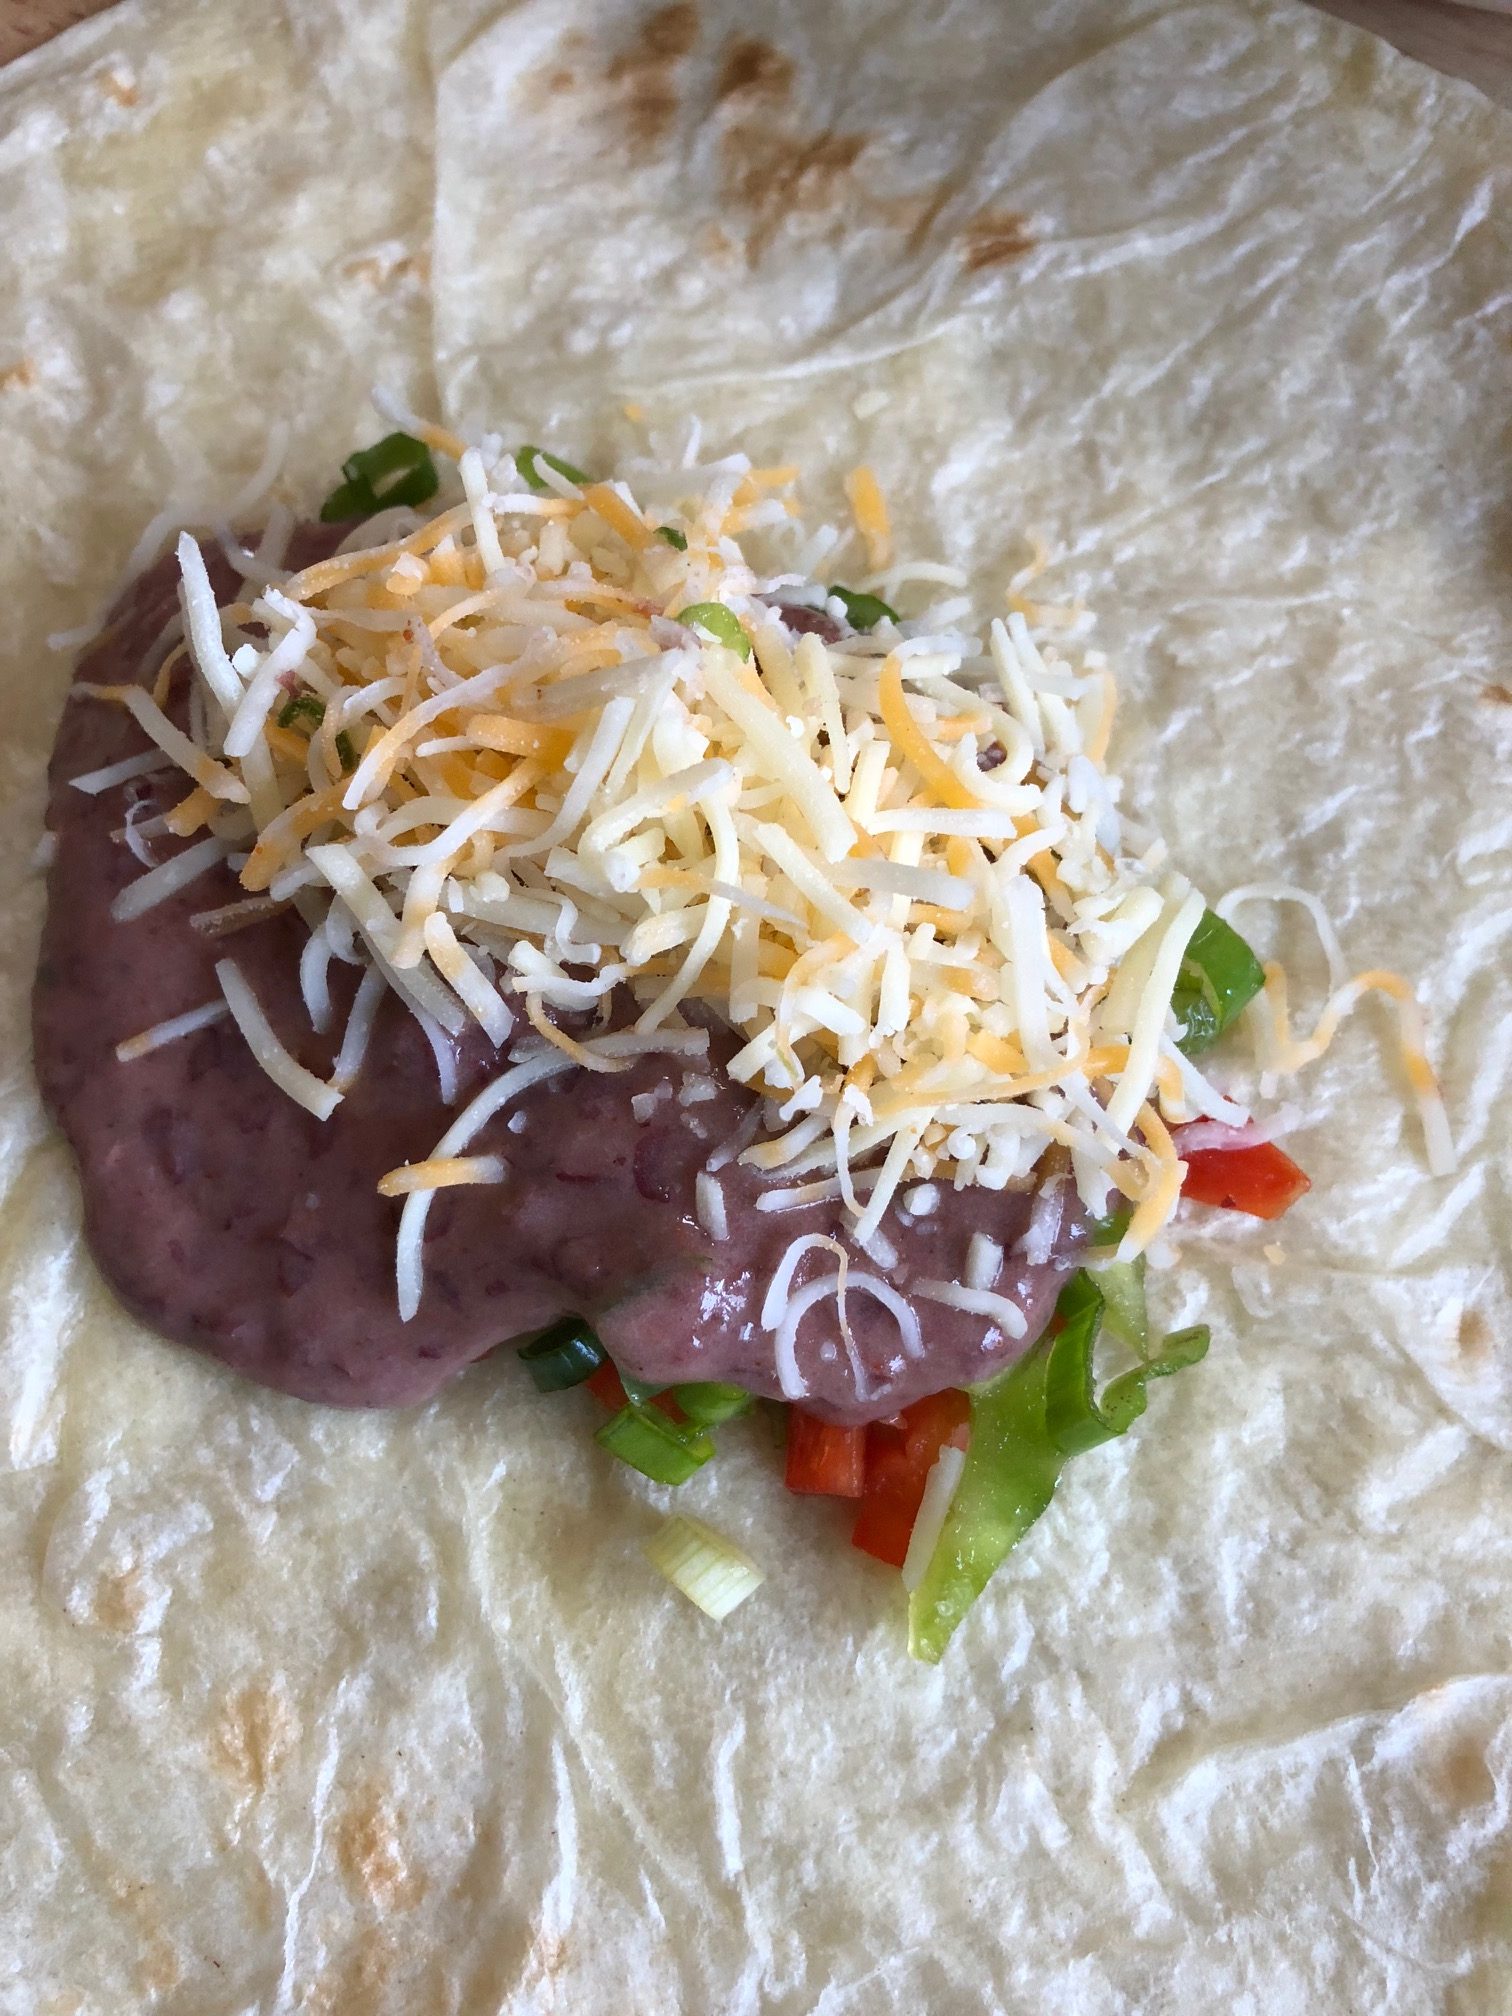 tortilla with ingredients inside. The ingredients include refried beans, vegetables, and shredded cheese.